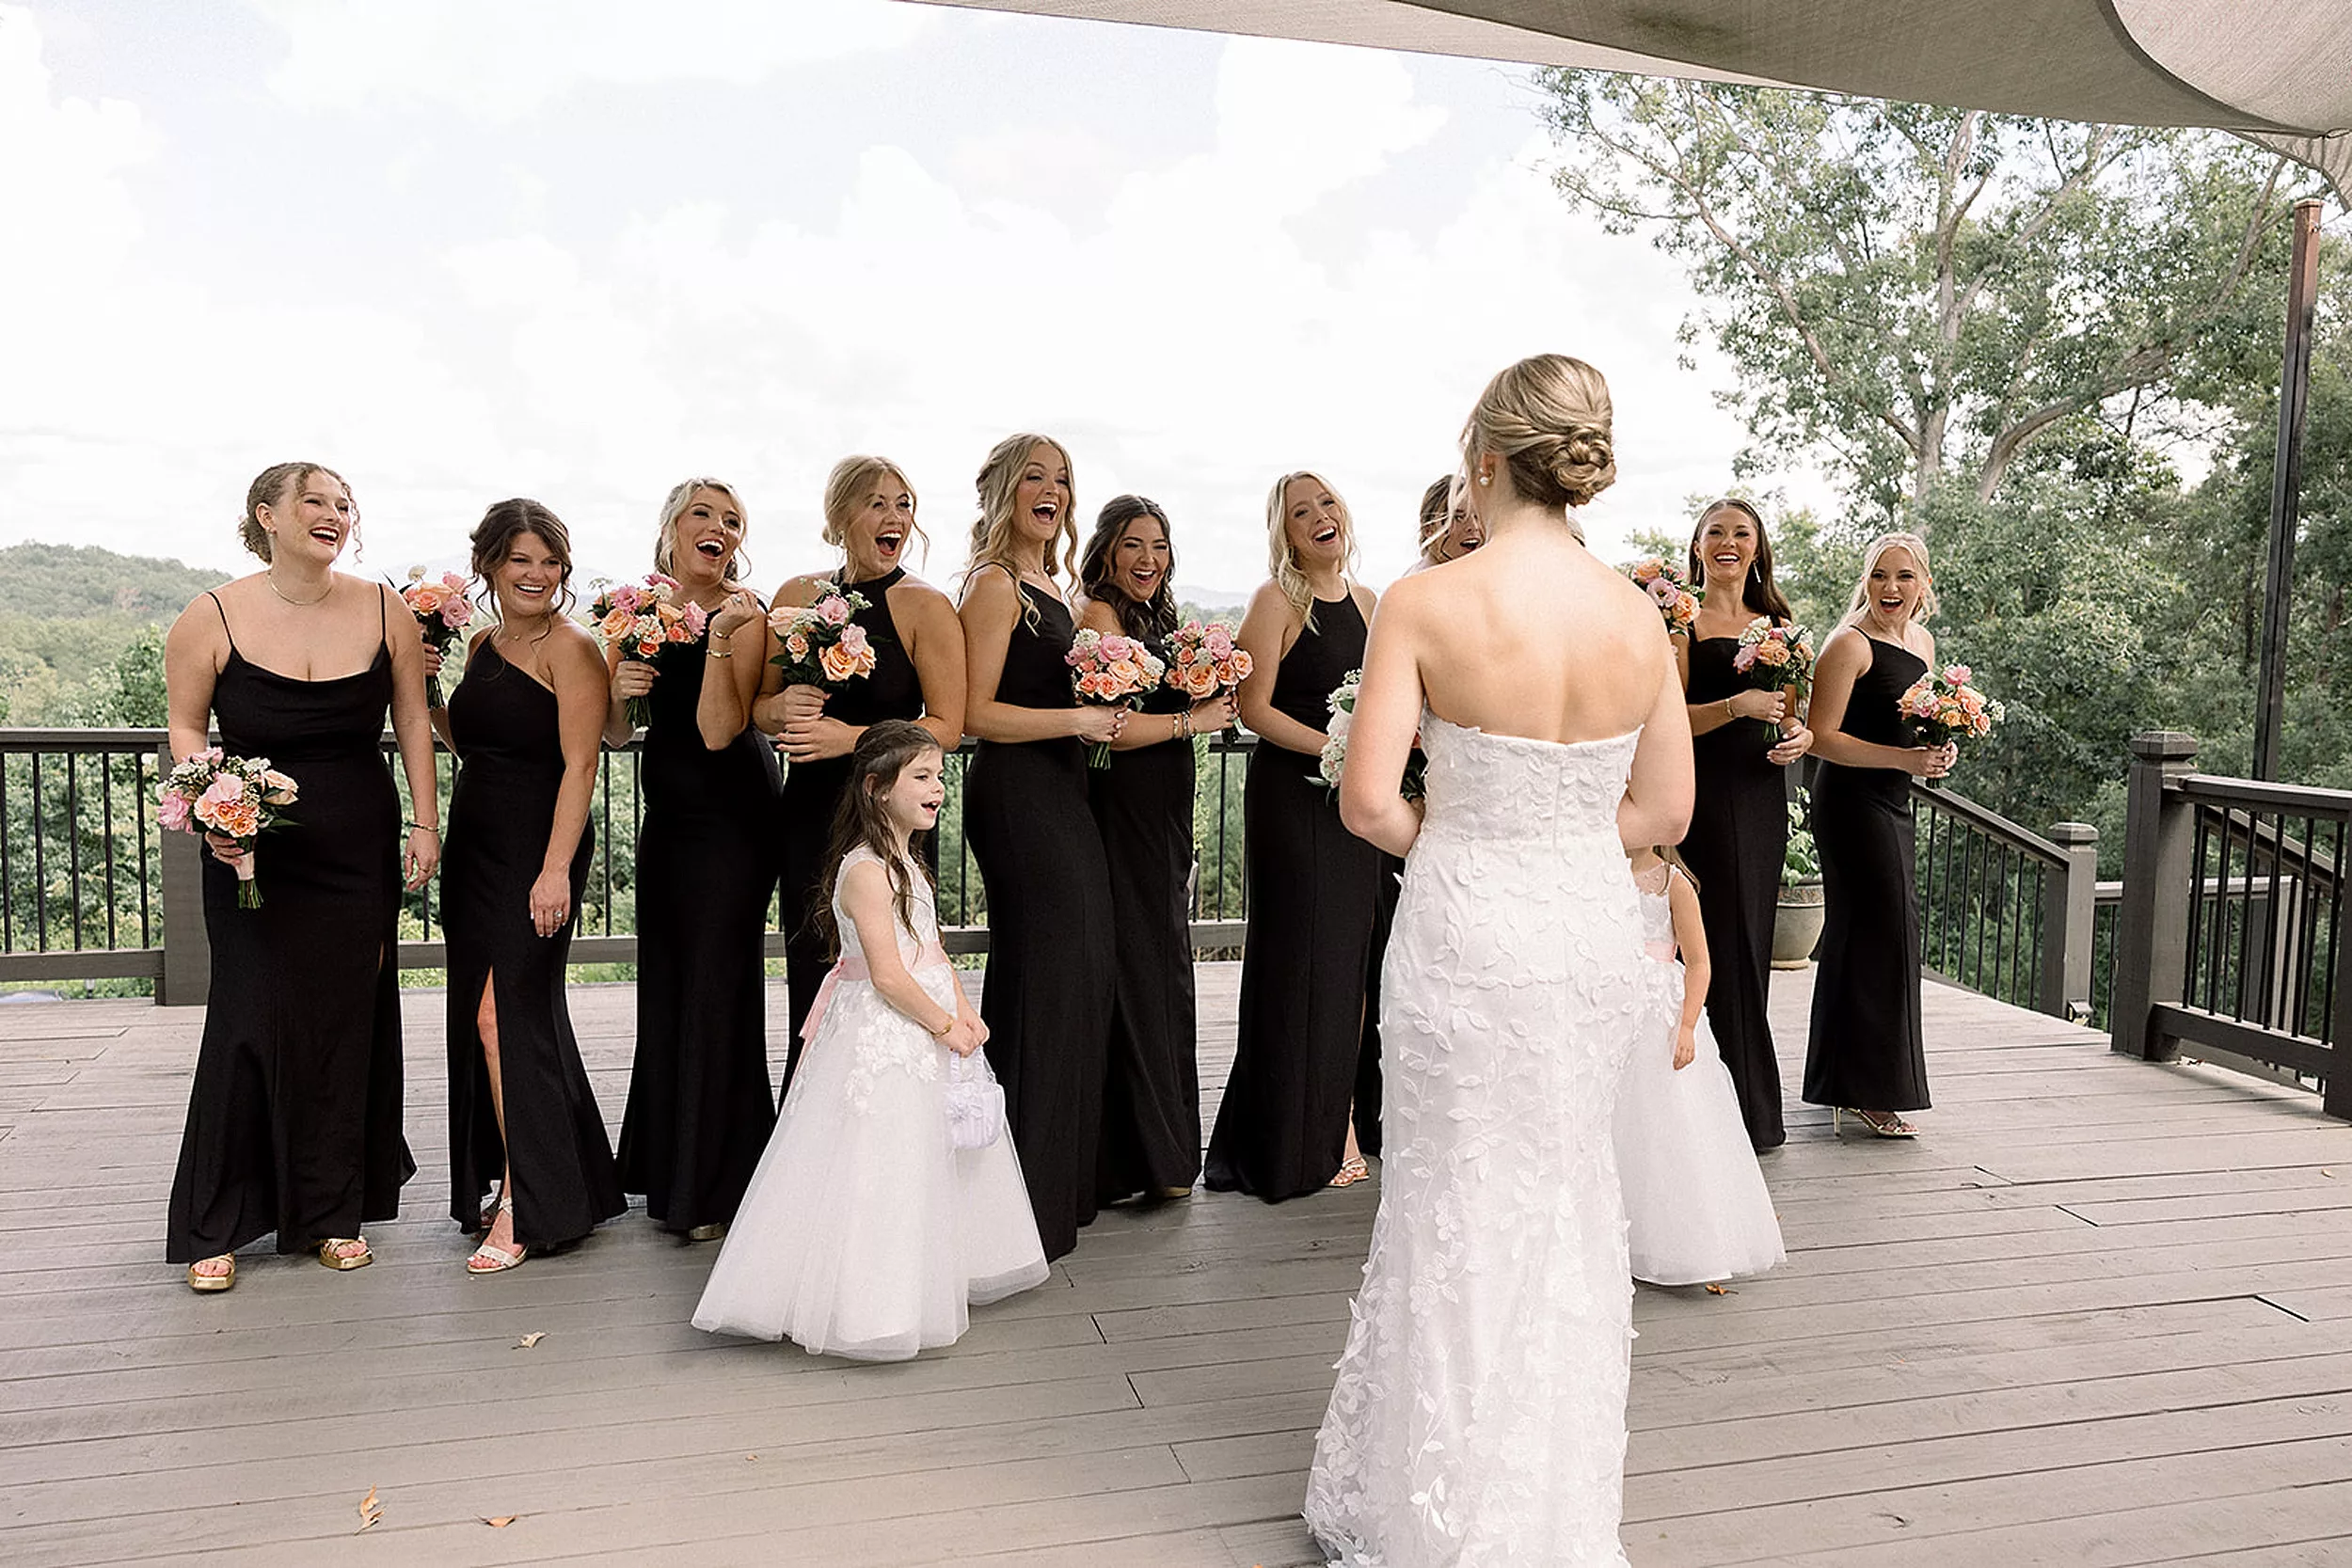 A bridal party in all black dresses stands on a porch and celebrates as they see the bride in her dress for the first time